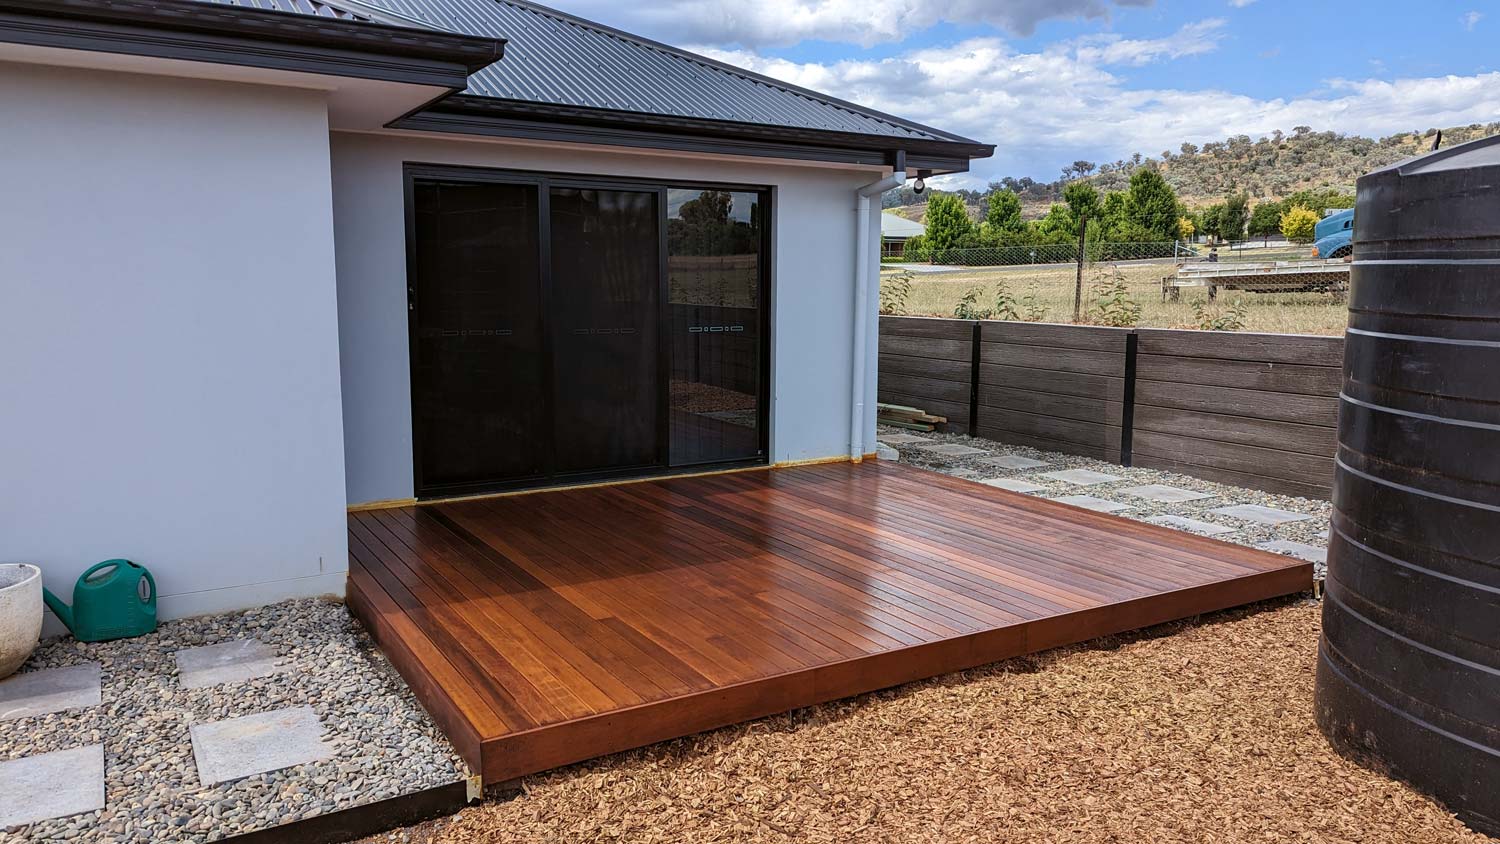 New Deck in North Tamworth NSW built by Landscaping Down Under